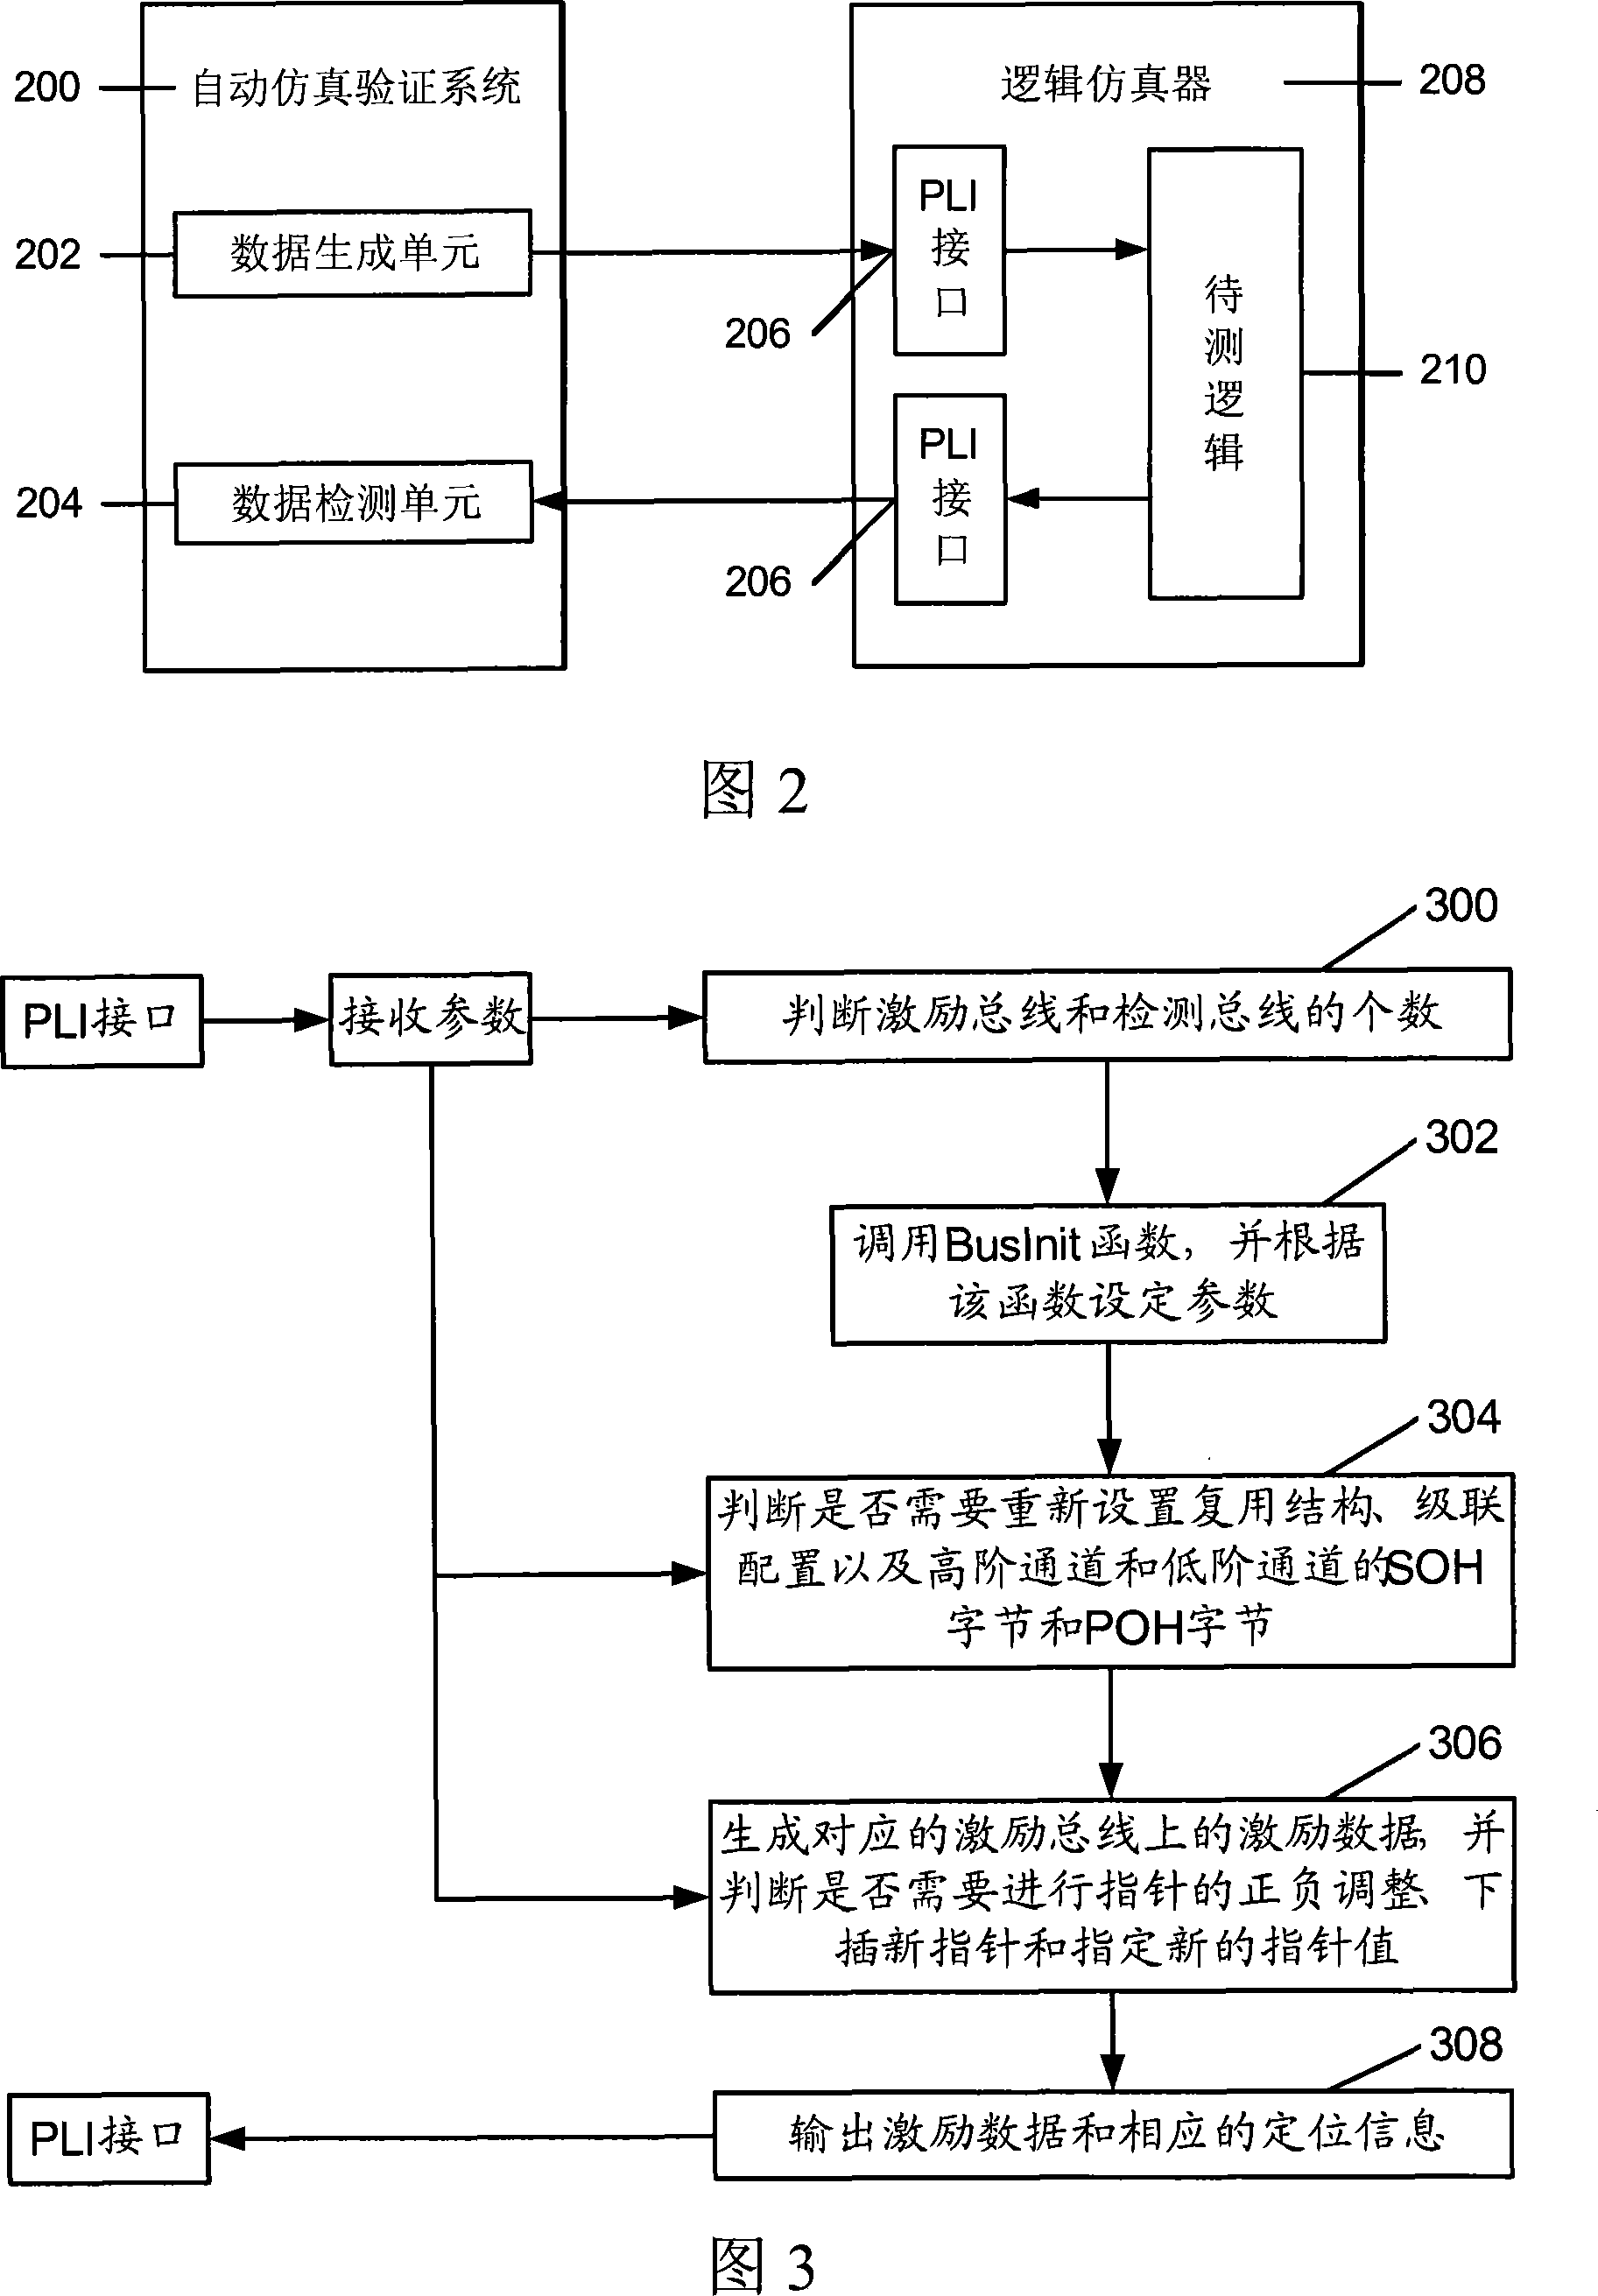 Simulation checking system and its method for SDH logical design